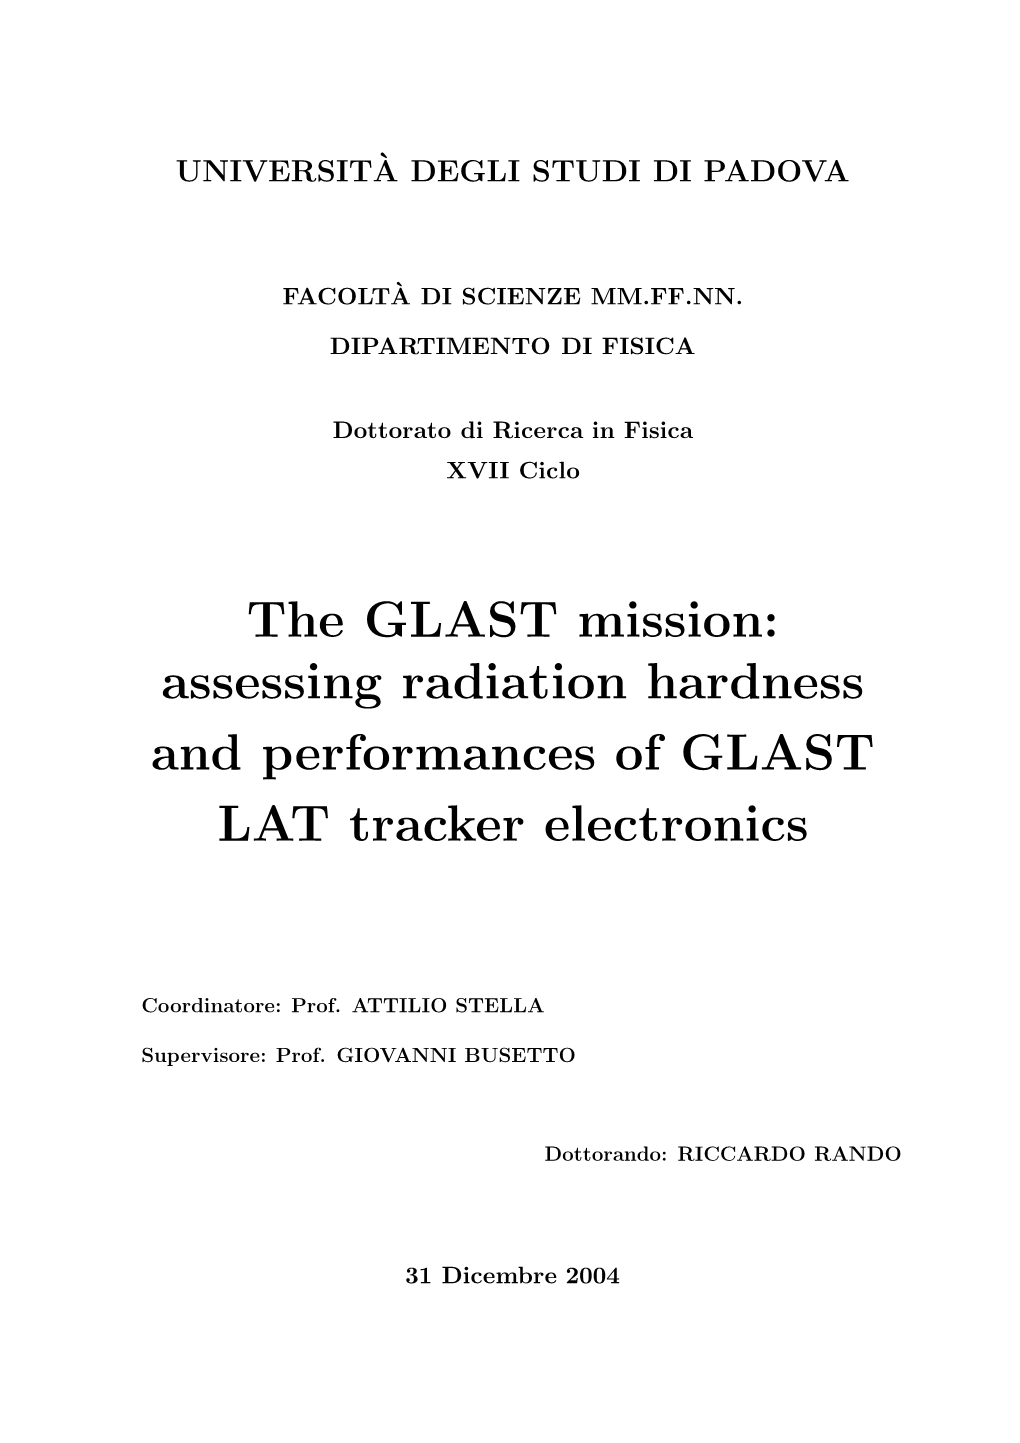 The GLAST Mission: Assessing Radiation Hardness and Performances of GLAST LAT Tracker Electronics